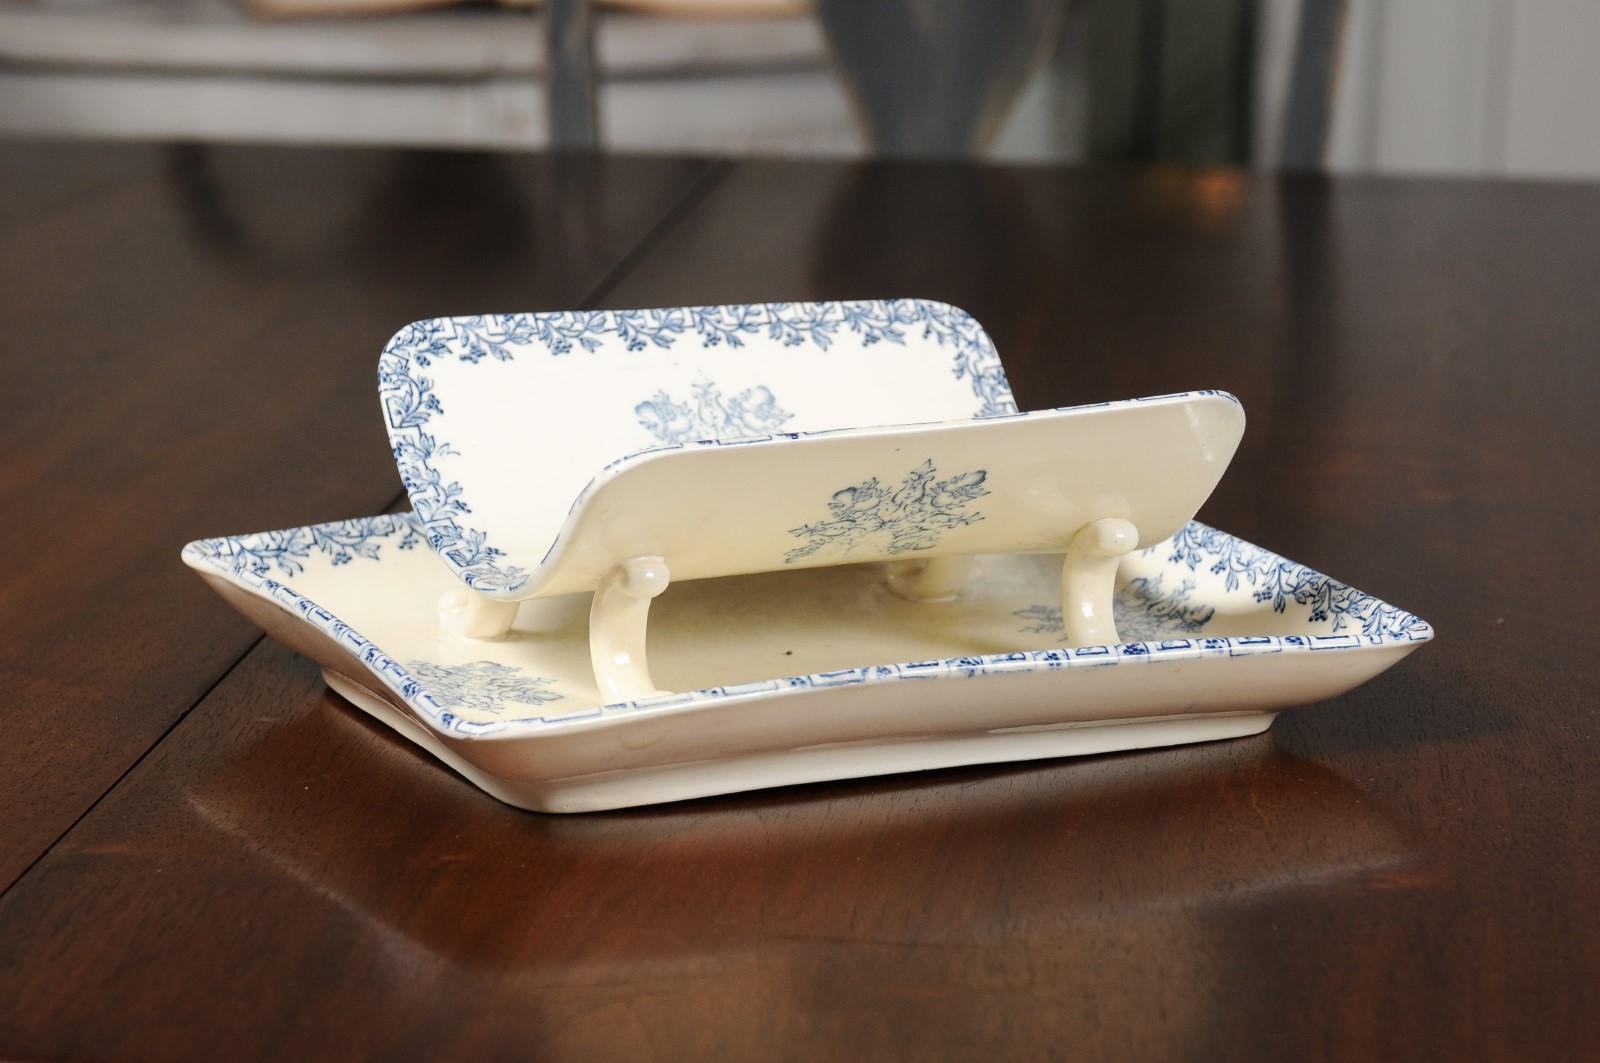 A French Terre de Fer blue and white asparagus platter from the 19th century, with strainer. Born in France during the 19th century, this Terre de Fer platter features a curving asparagus cradle raised on petite feet and adorned with a blue foliage